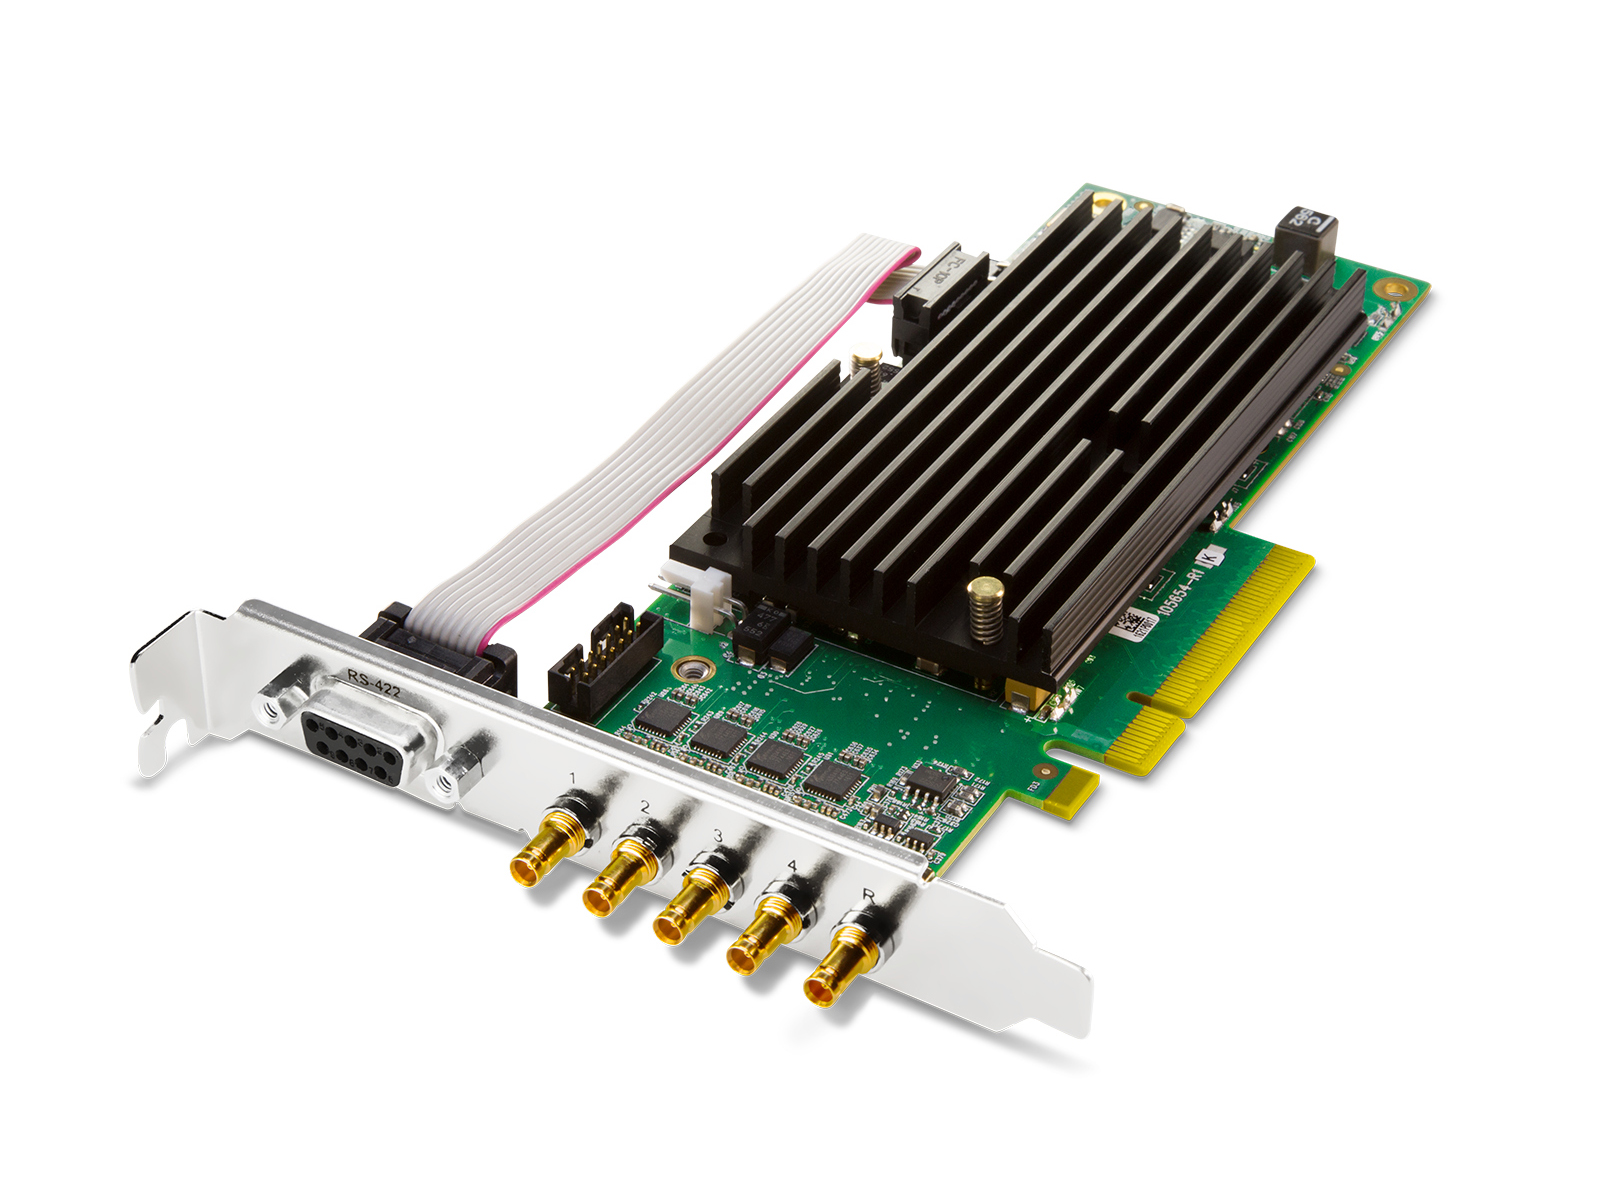 AJA CRV44-BNC-NF 8-lane PCIe 2.0 Flexible Multi-format I/O Card with full size BNC and Passive Heat Sink